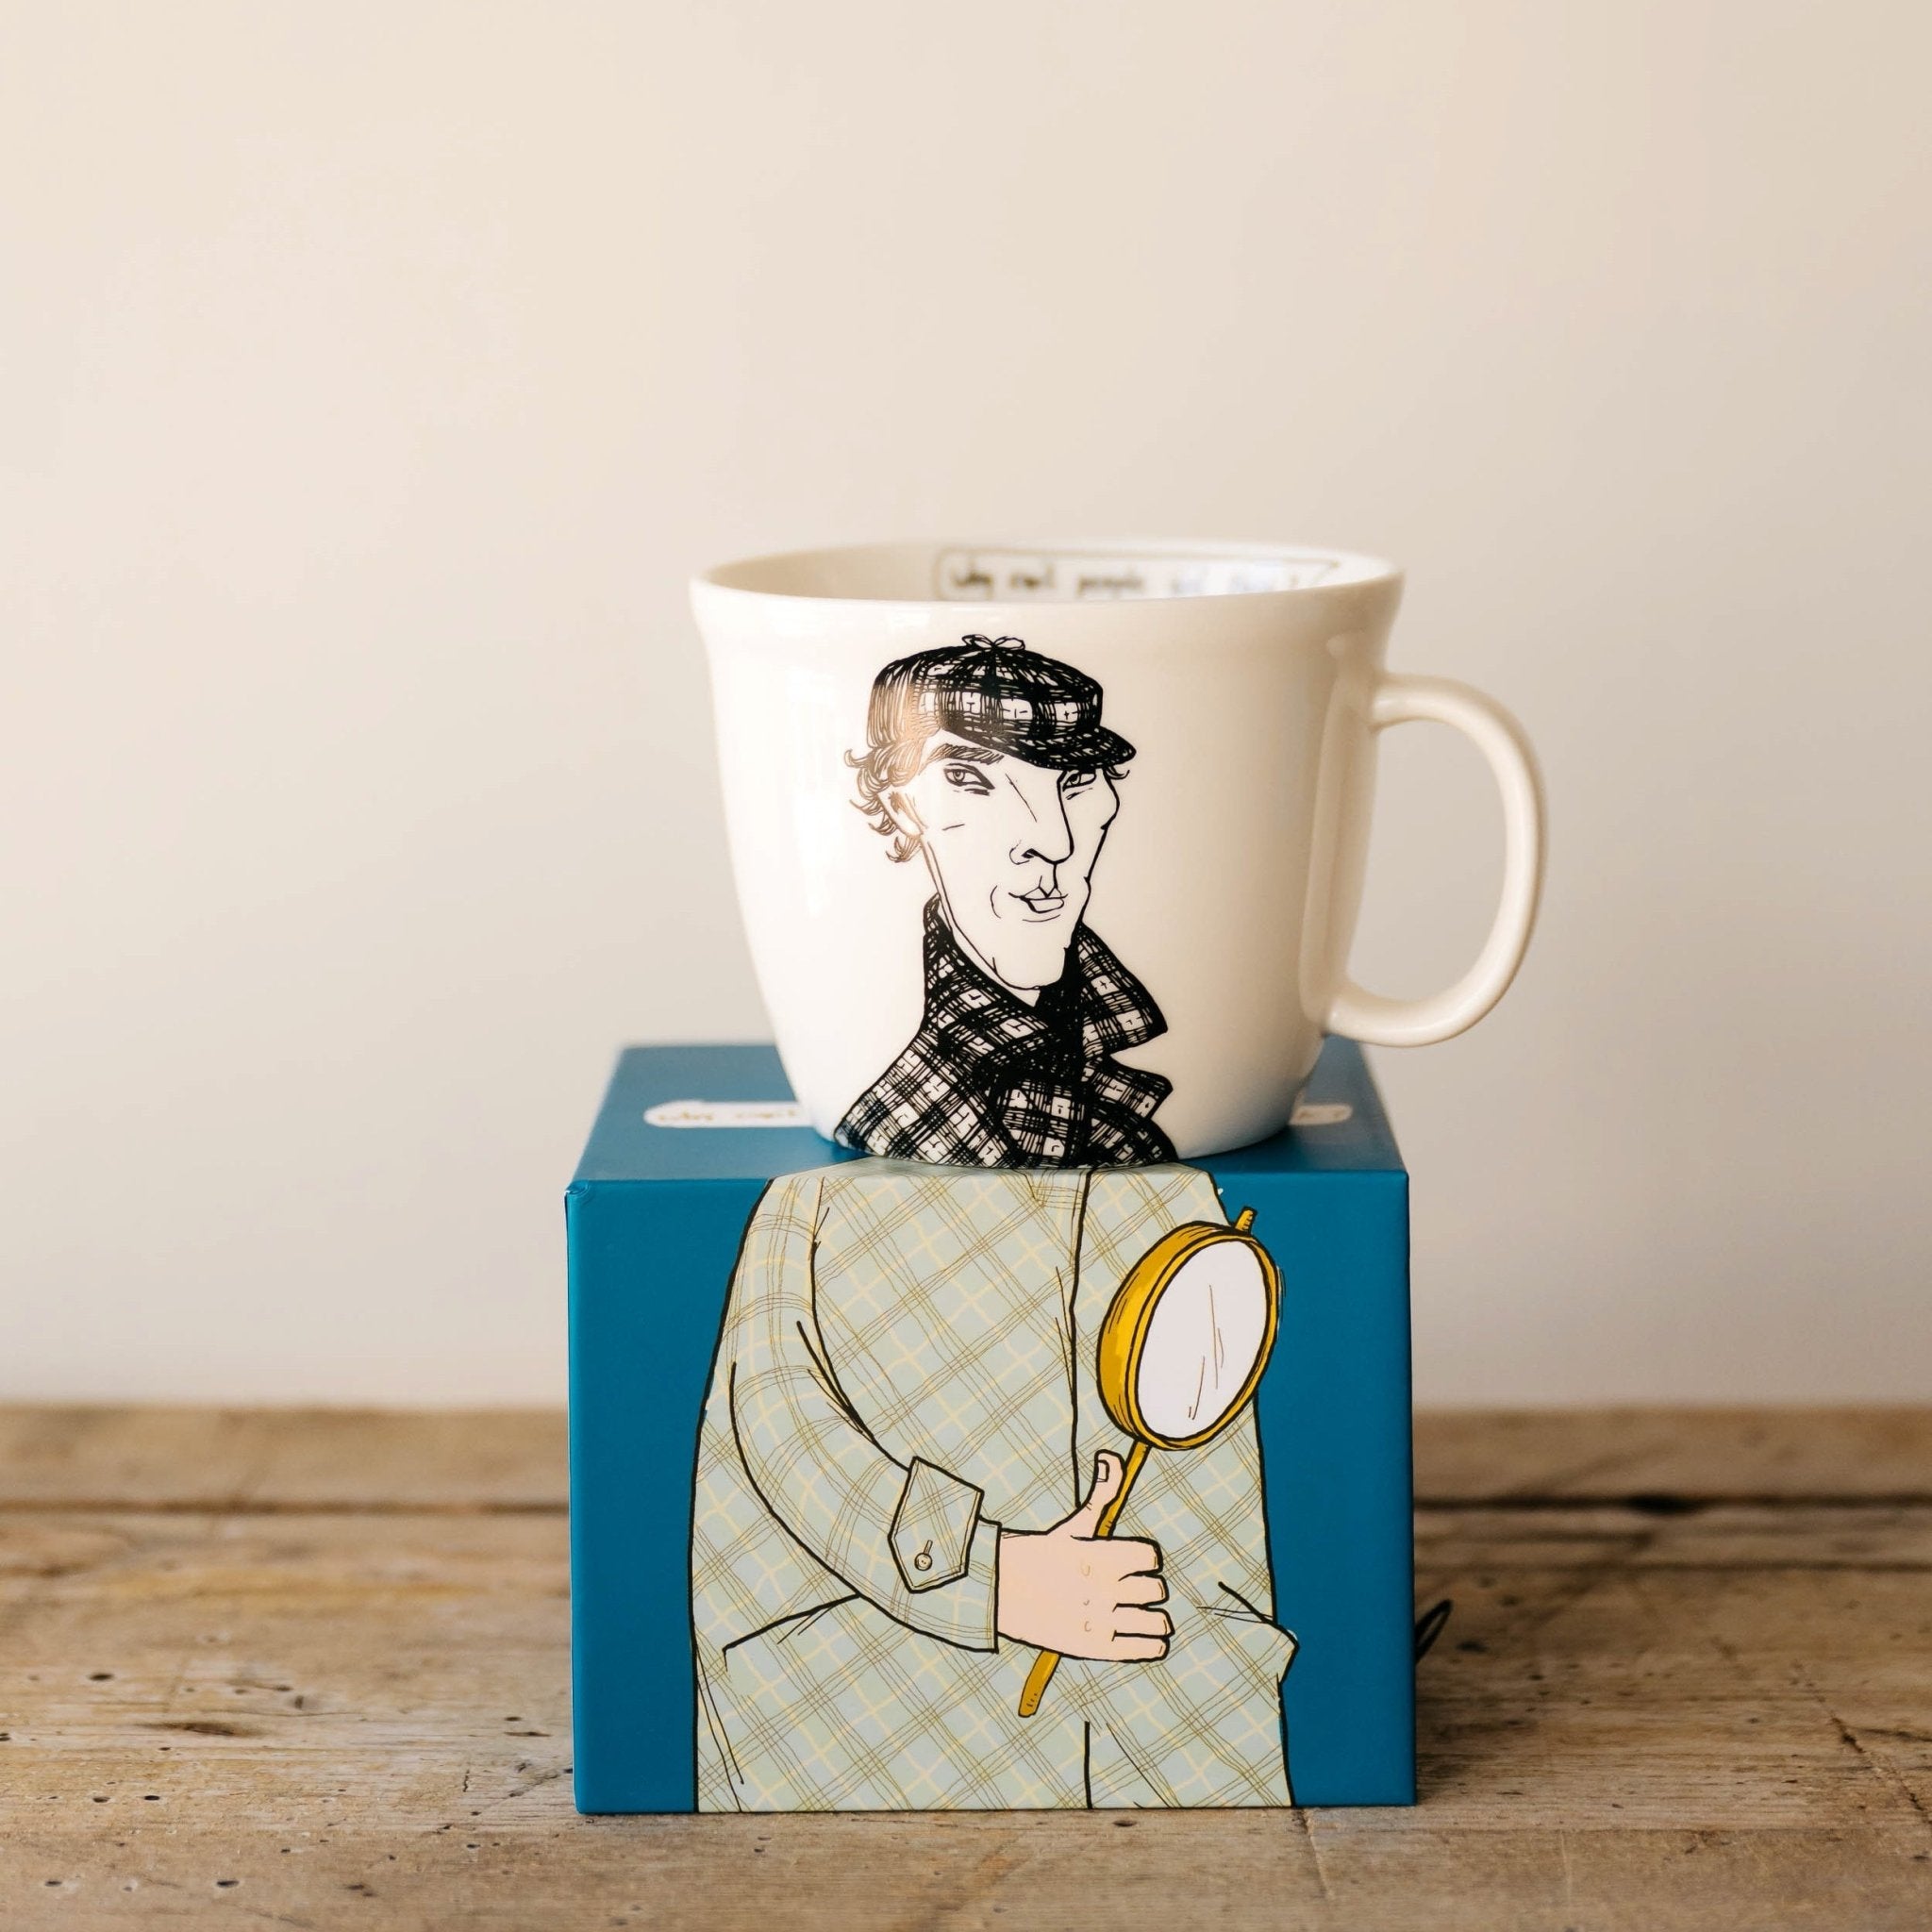 Porcelain cup inspired by Sherlock Holmes on the box